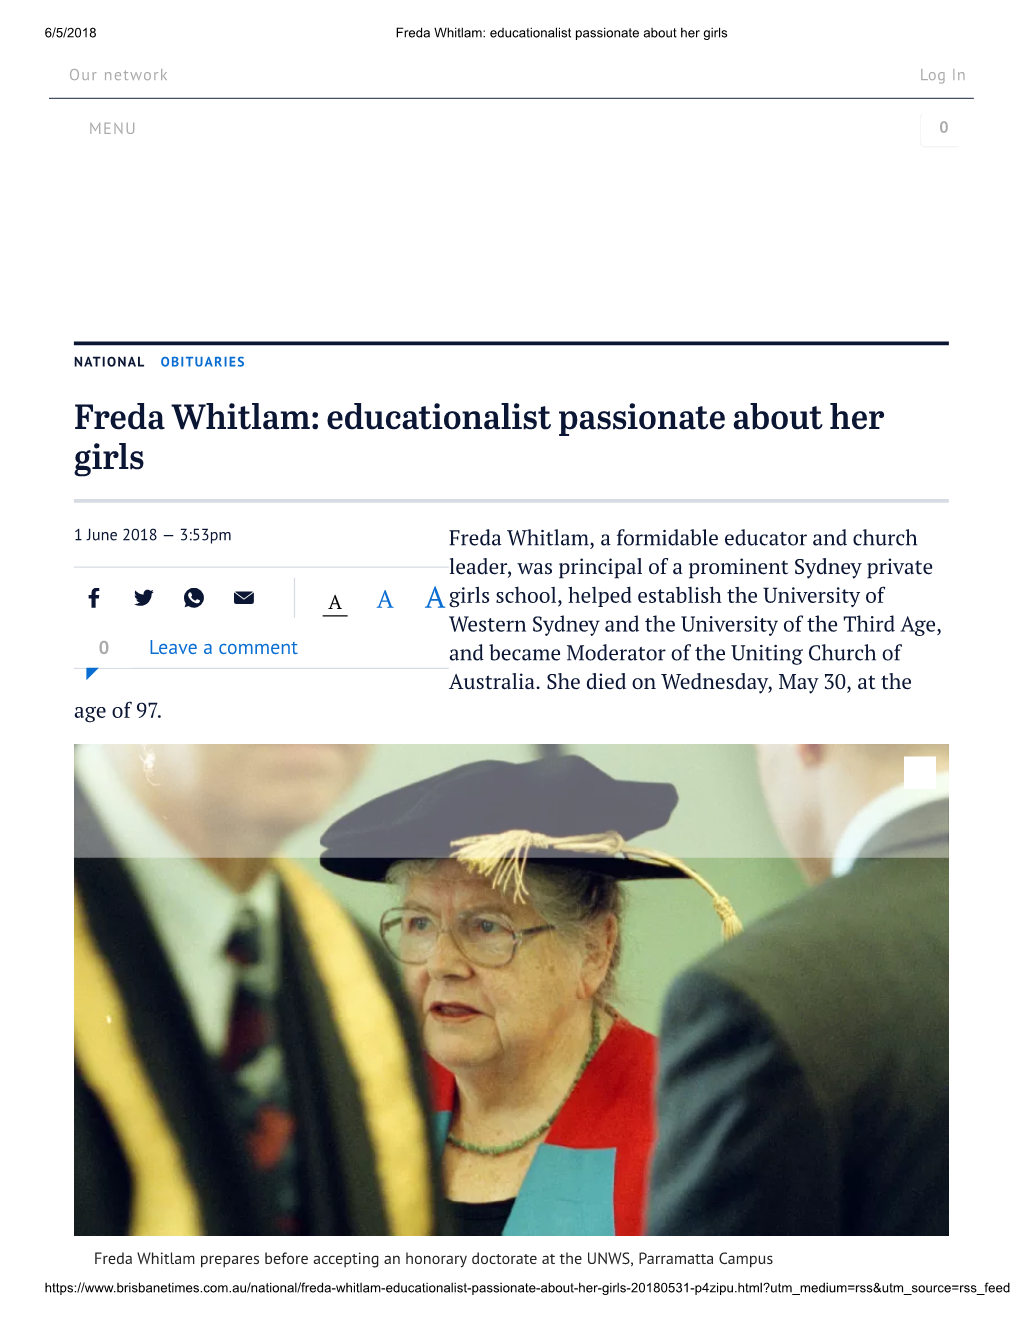 Freda Whitlam: Educationalist Passionate About Her Girls